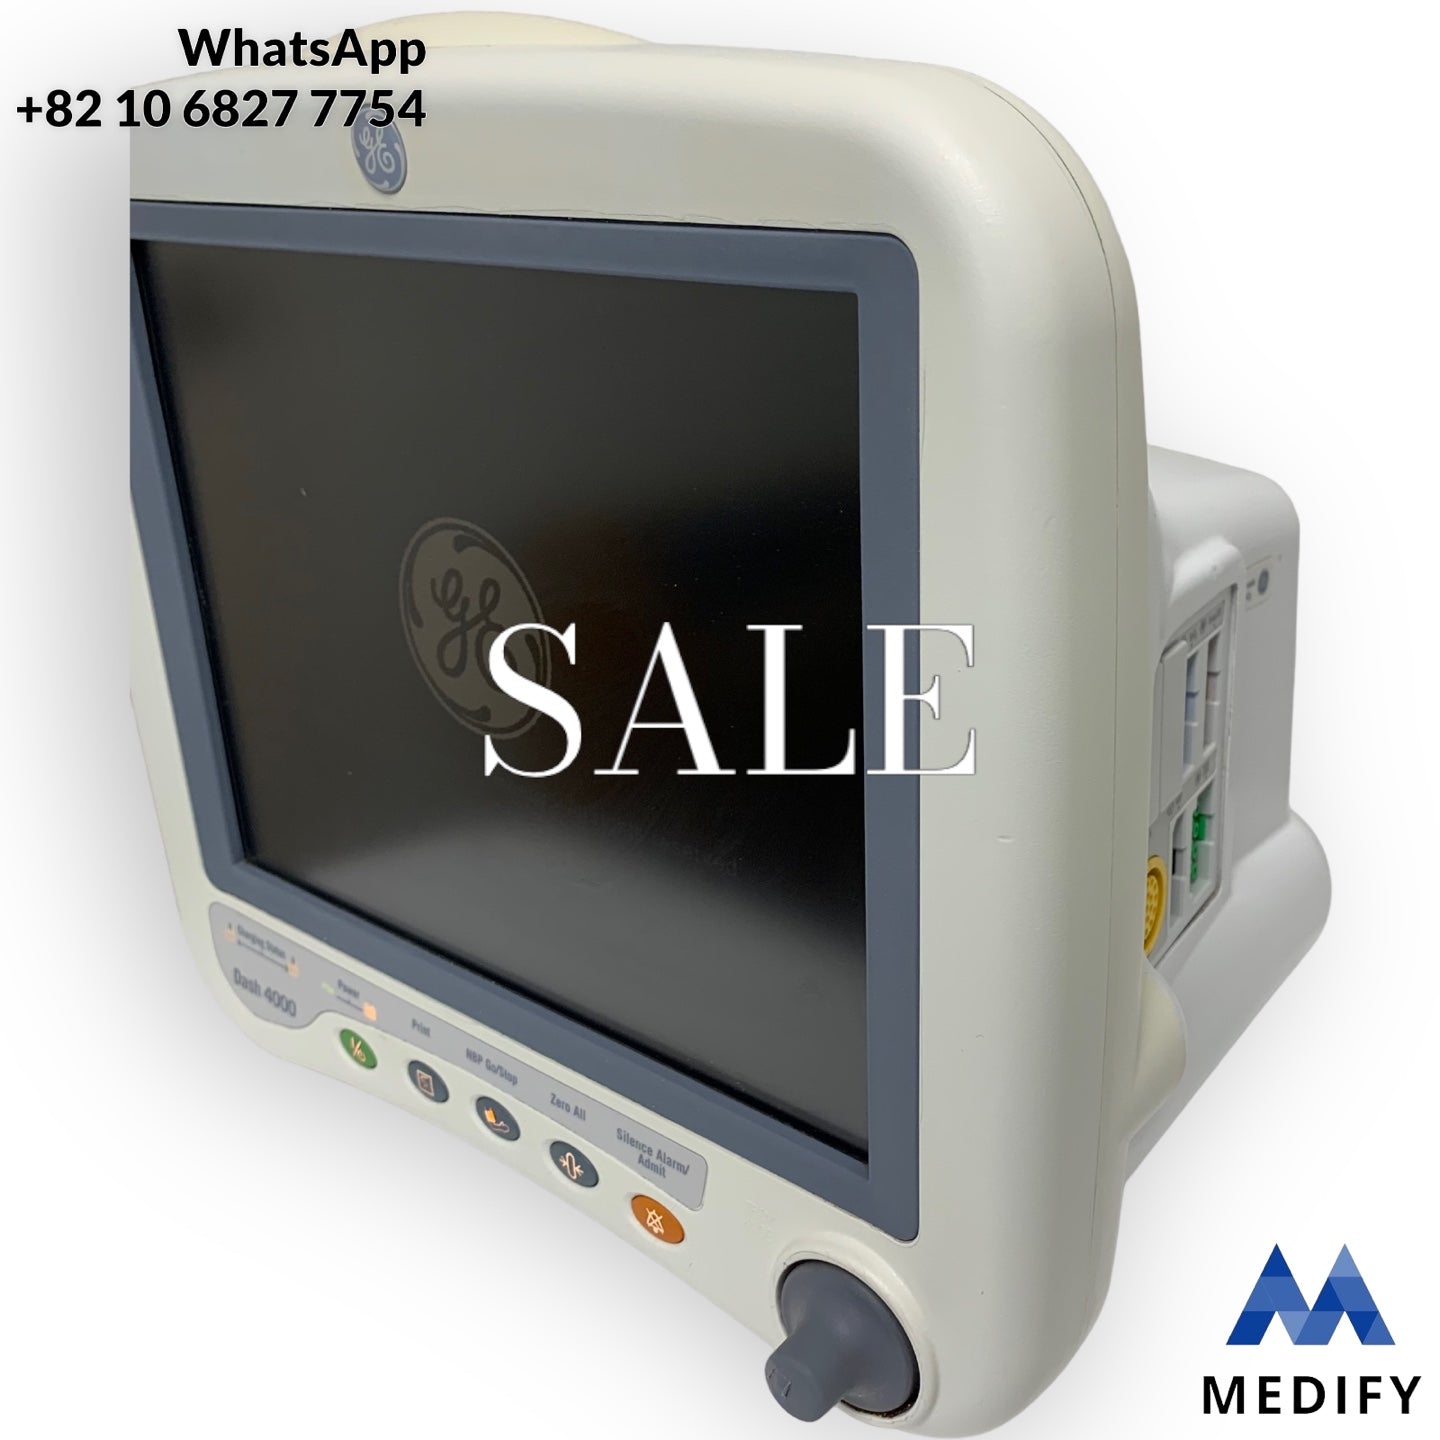 GE Dash 4000 Patient Monitor with Accessories: SP02, NiBP, Temp, Printer